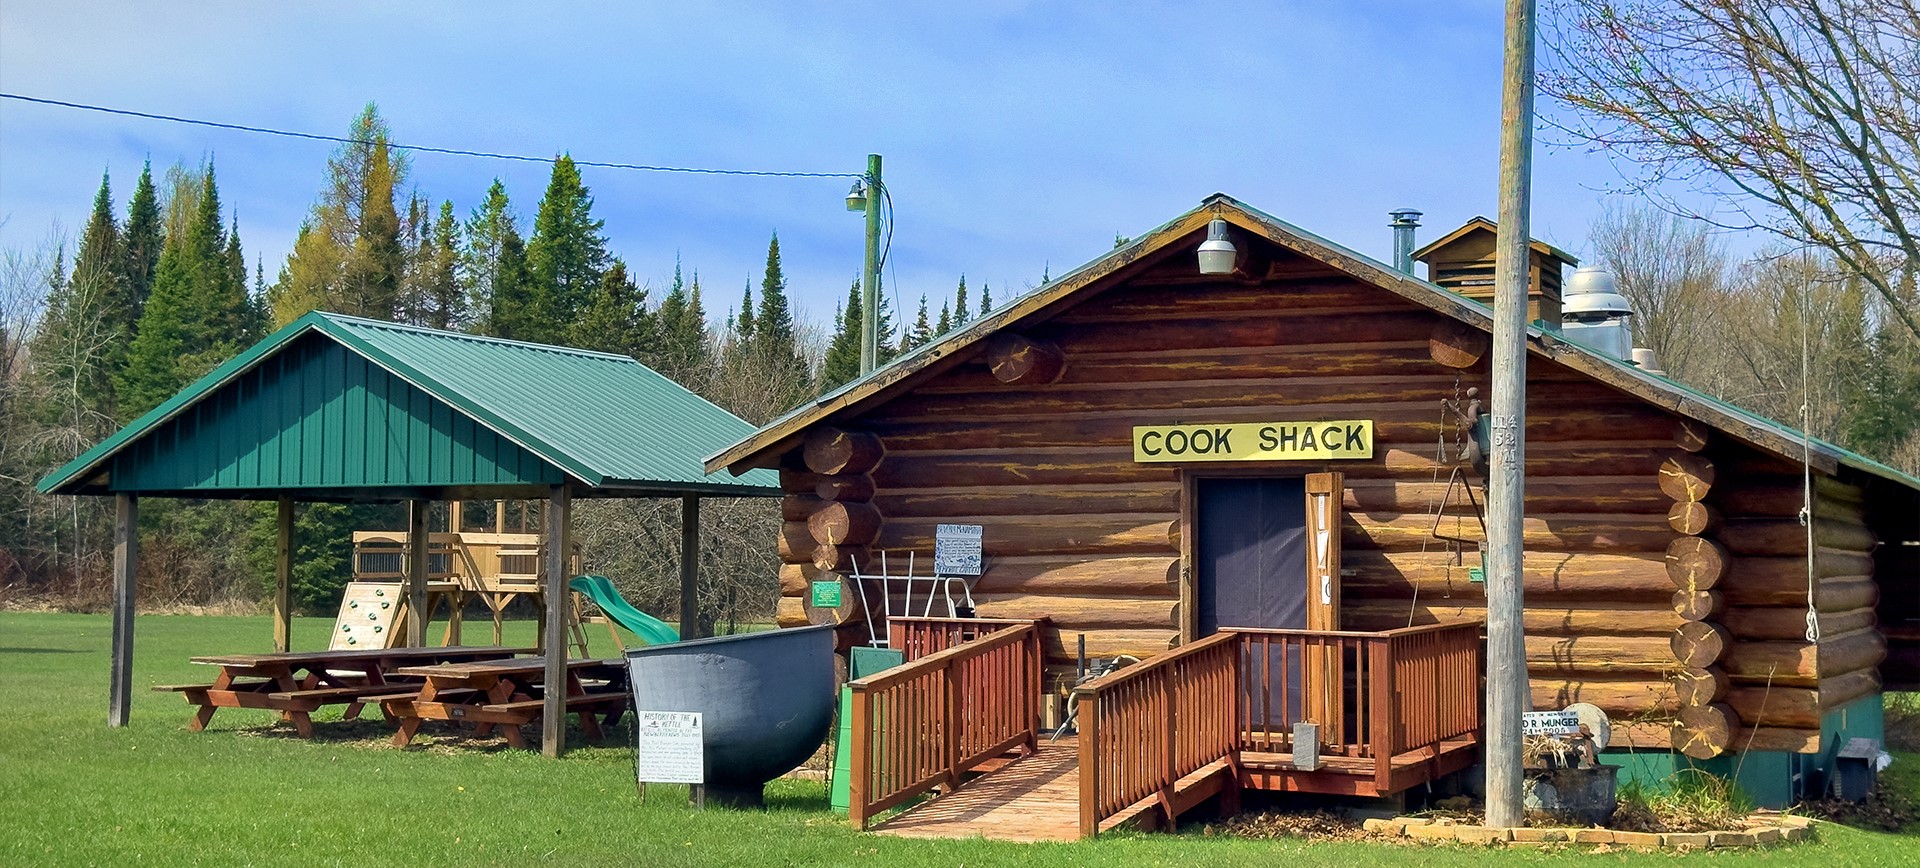 Loggers Cook Shack